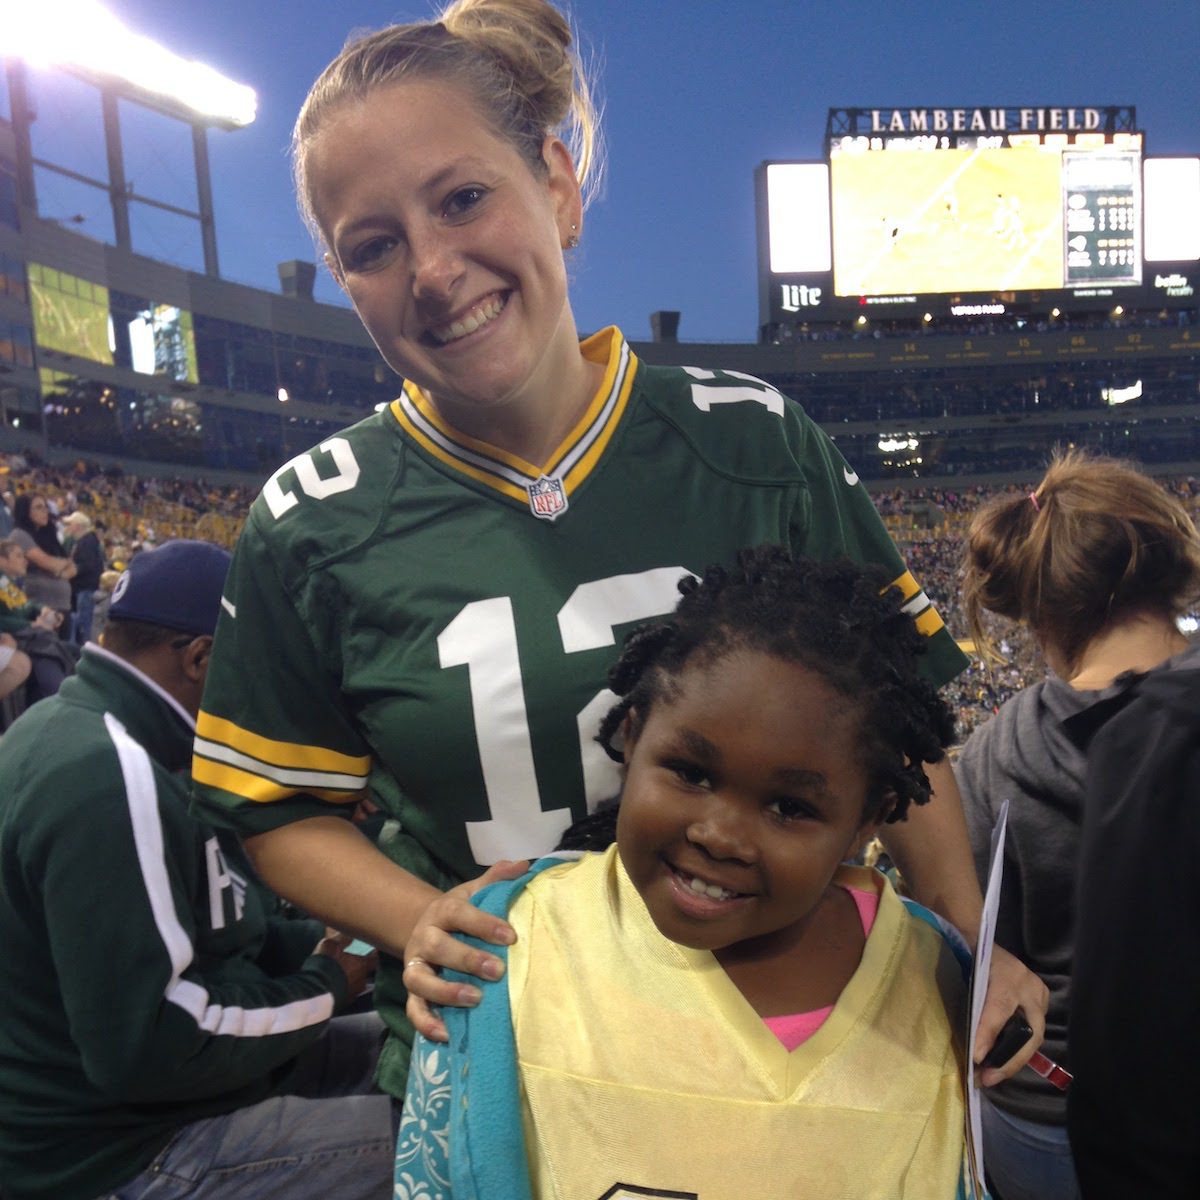 Big Sister Natalie Breezee and her Little Sis at Lambeau